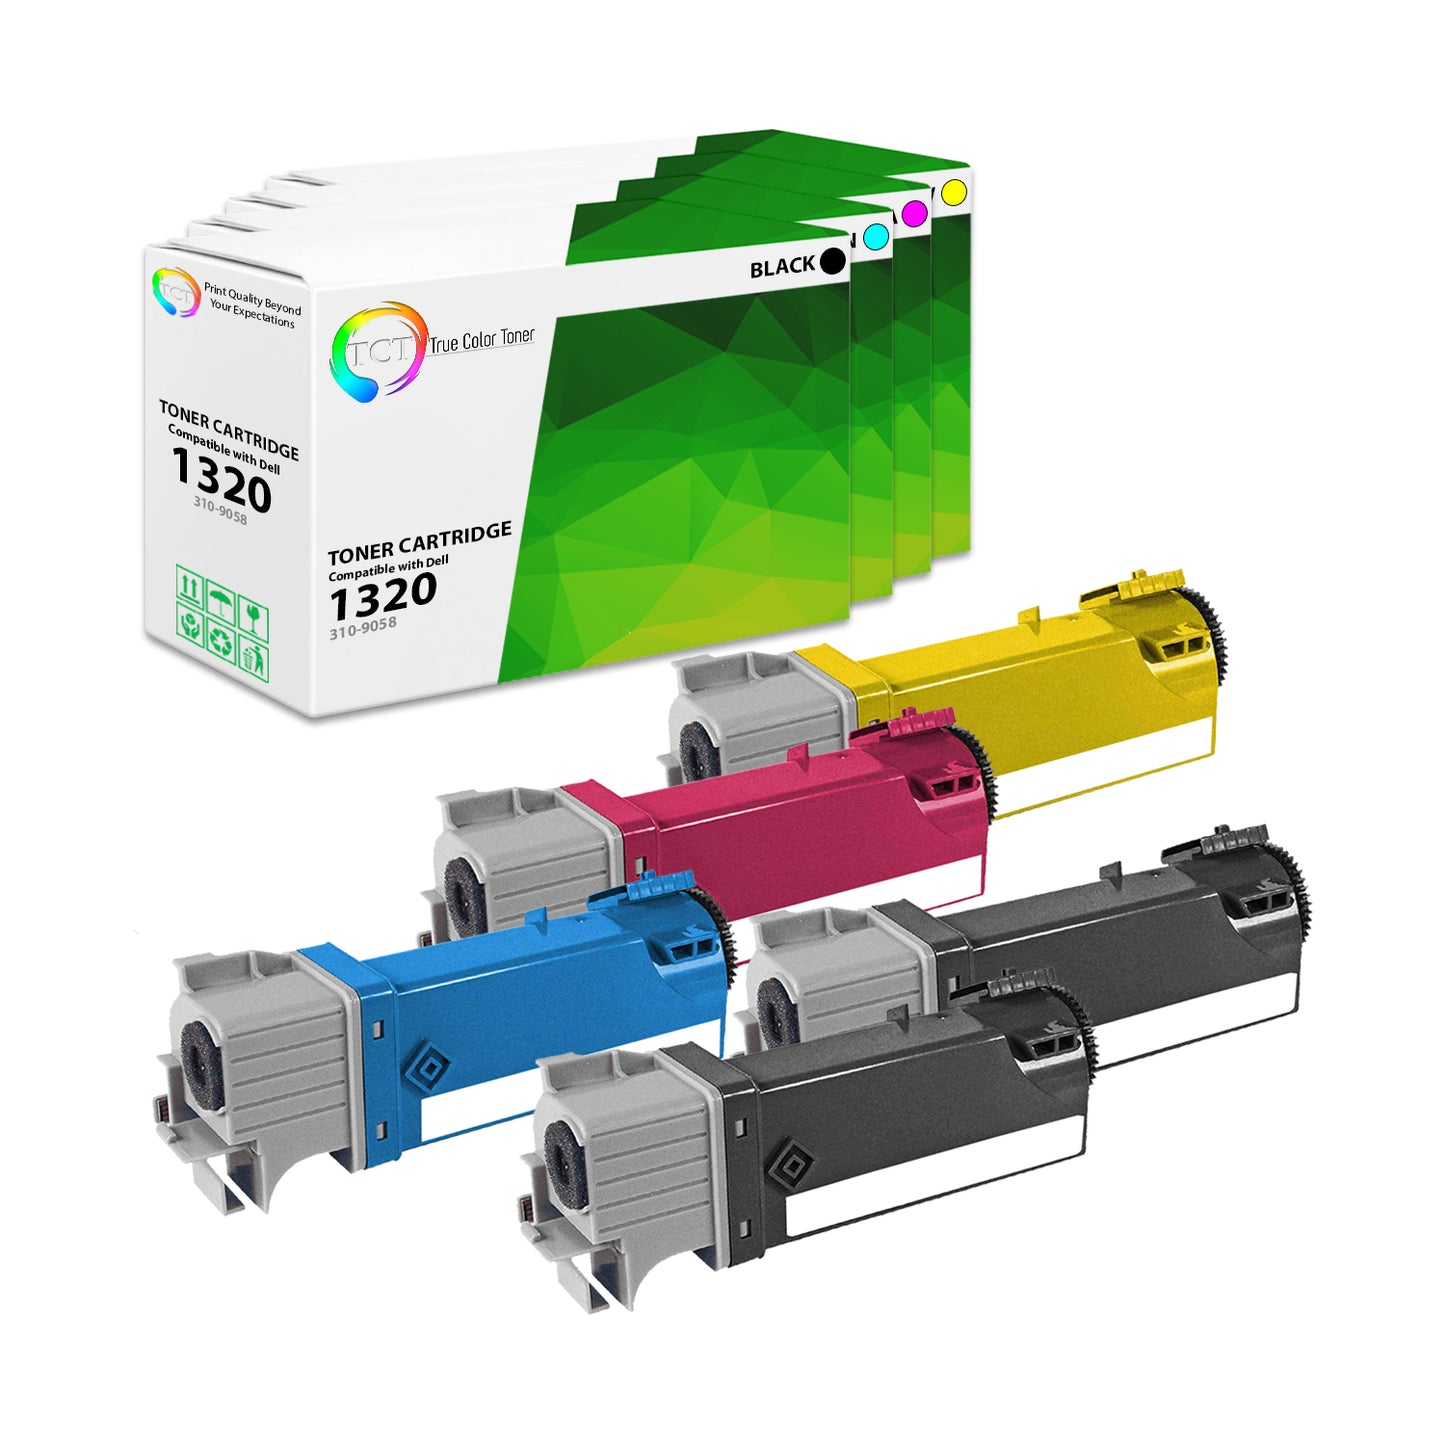 TCT Compatible Toner Cartridge Replacement for the Dell 1320 Series - 5 Pack (BK, C, M, Y)